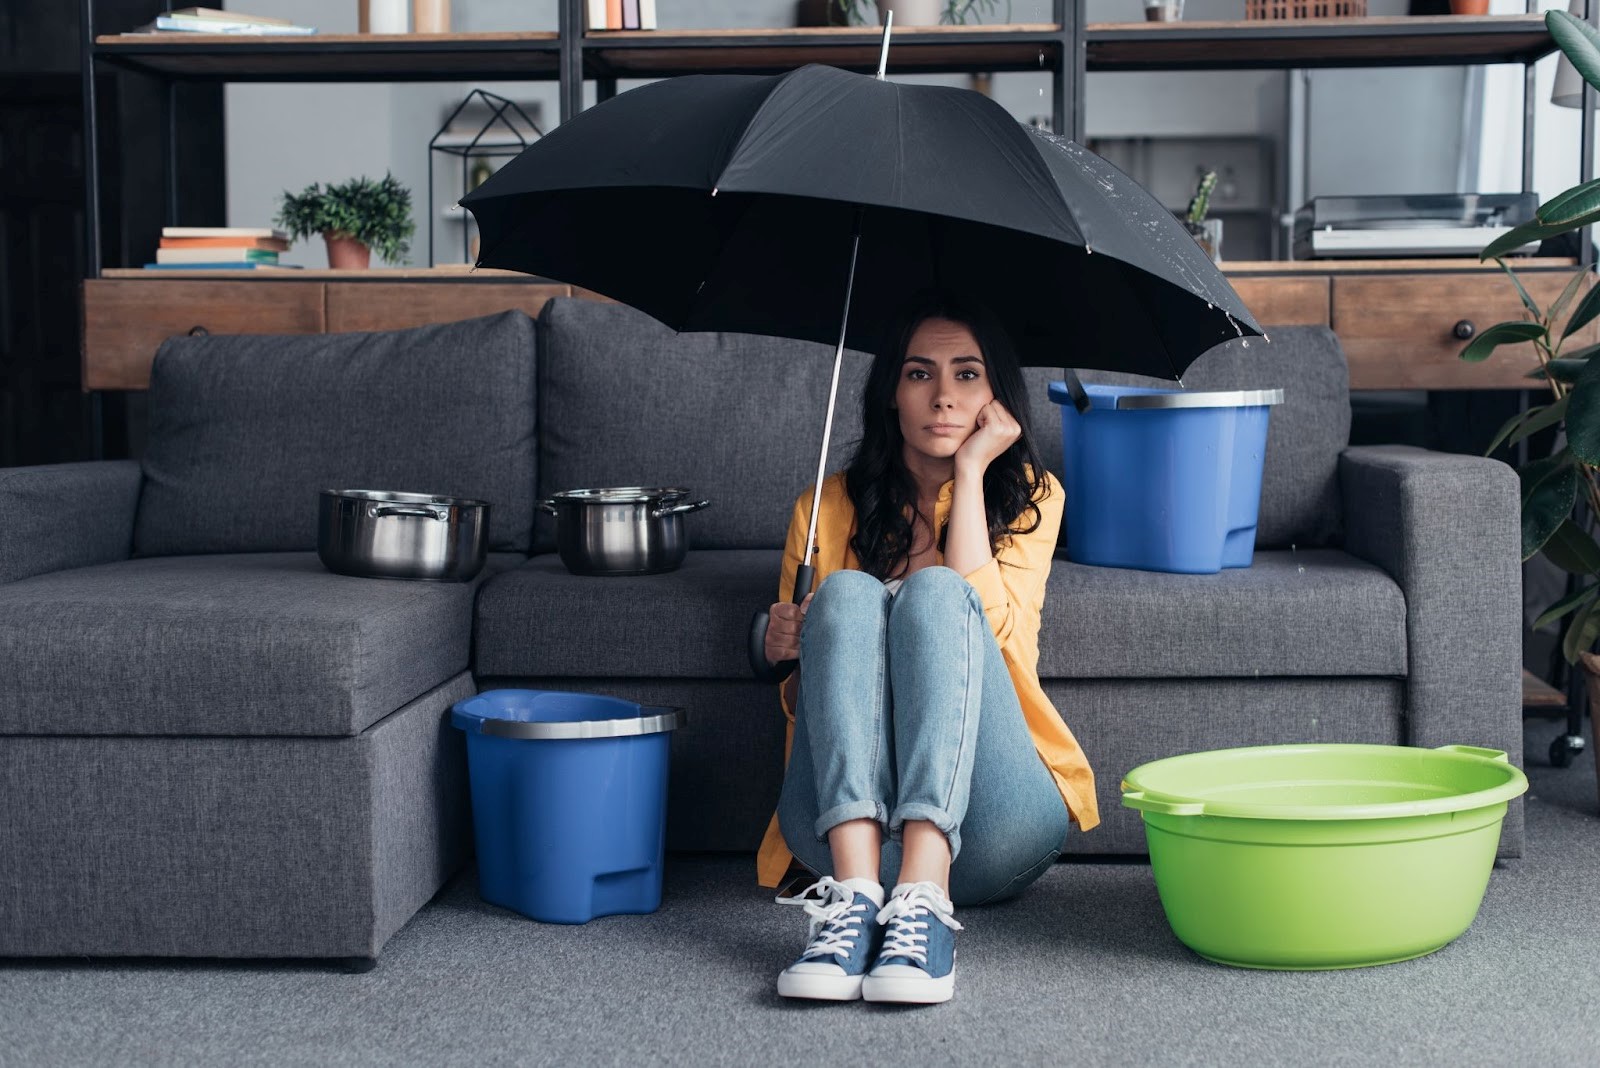 Pensive brunette girl sitting on floor with umbrella because she has a water leak